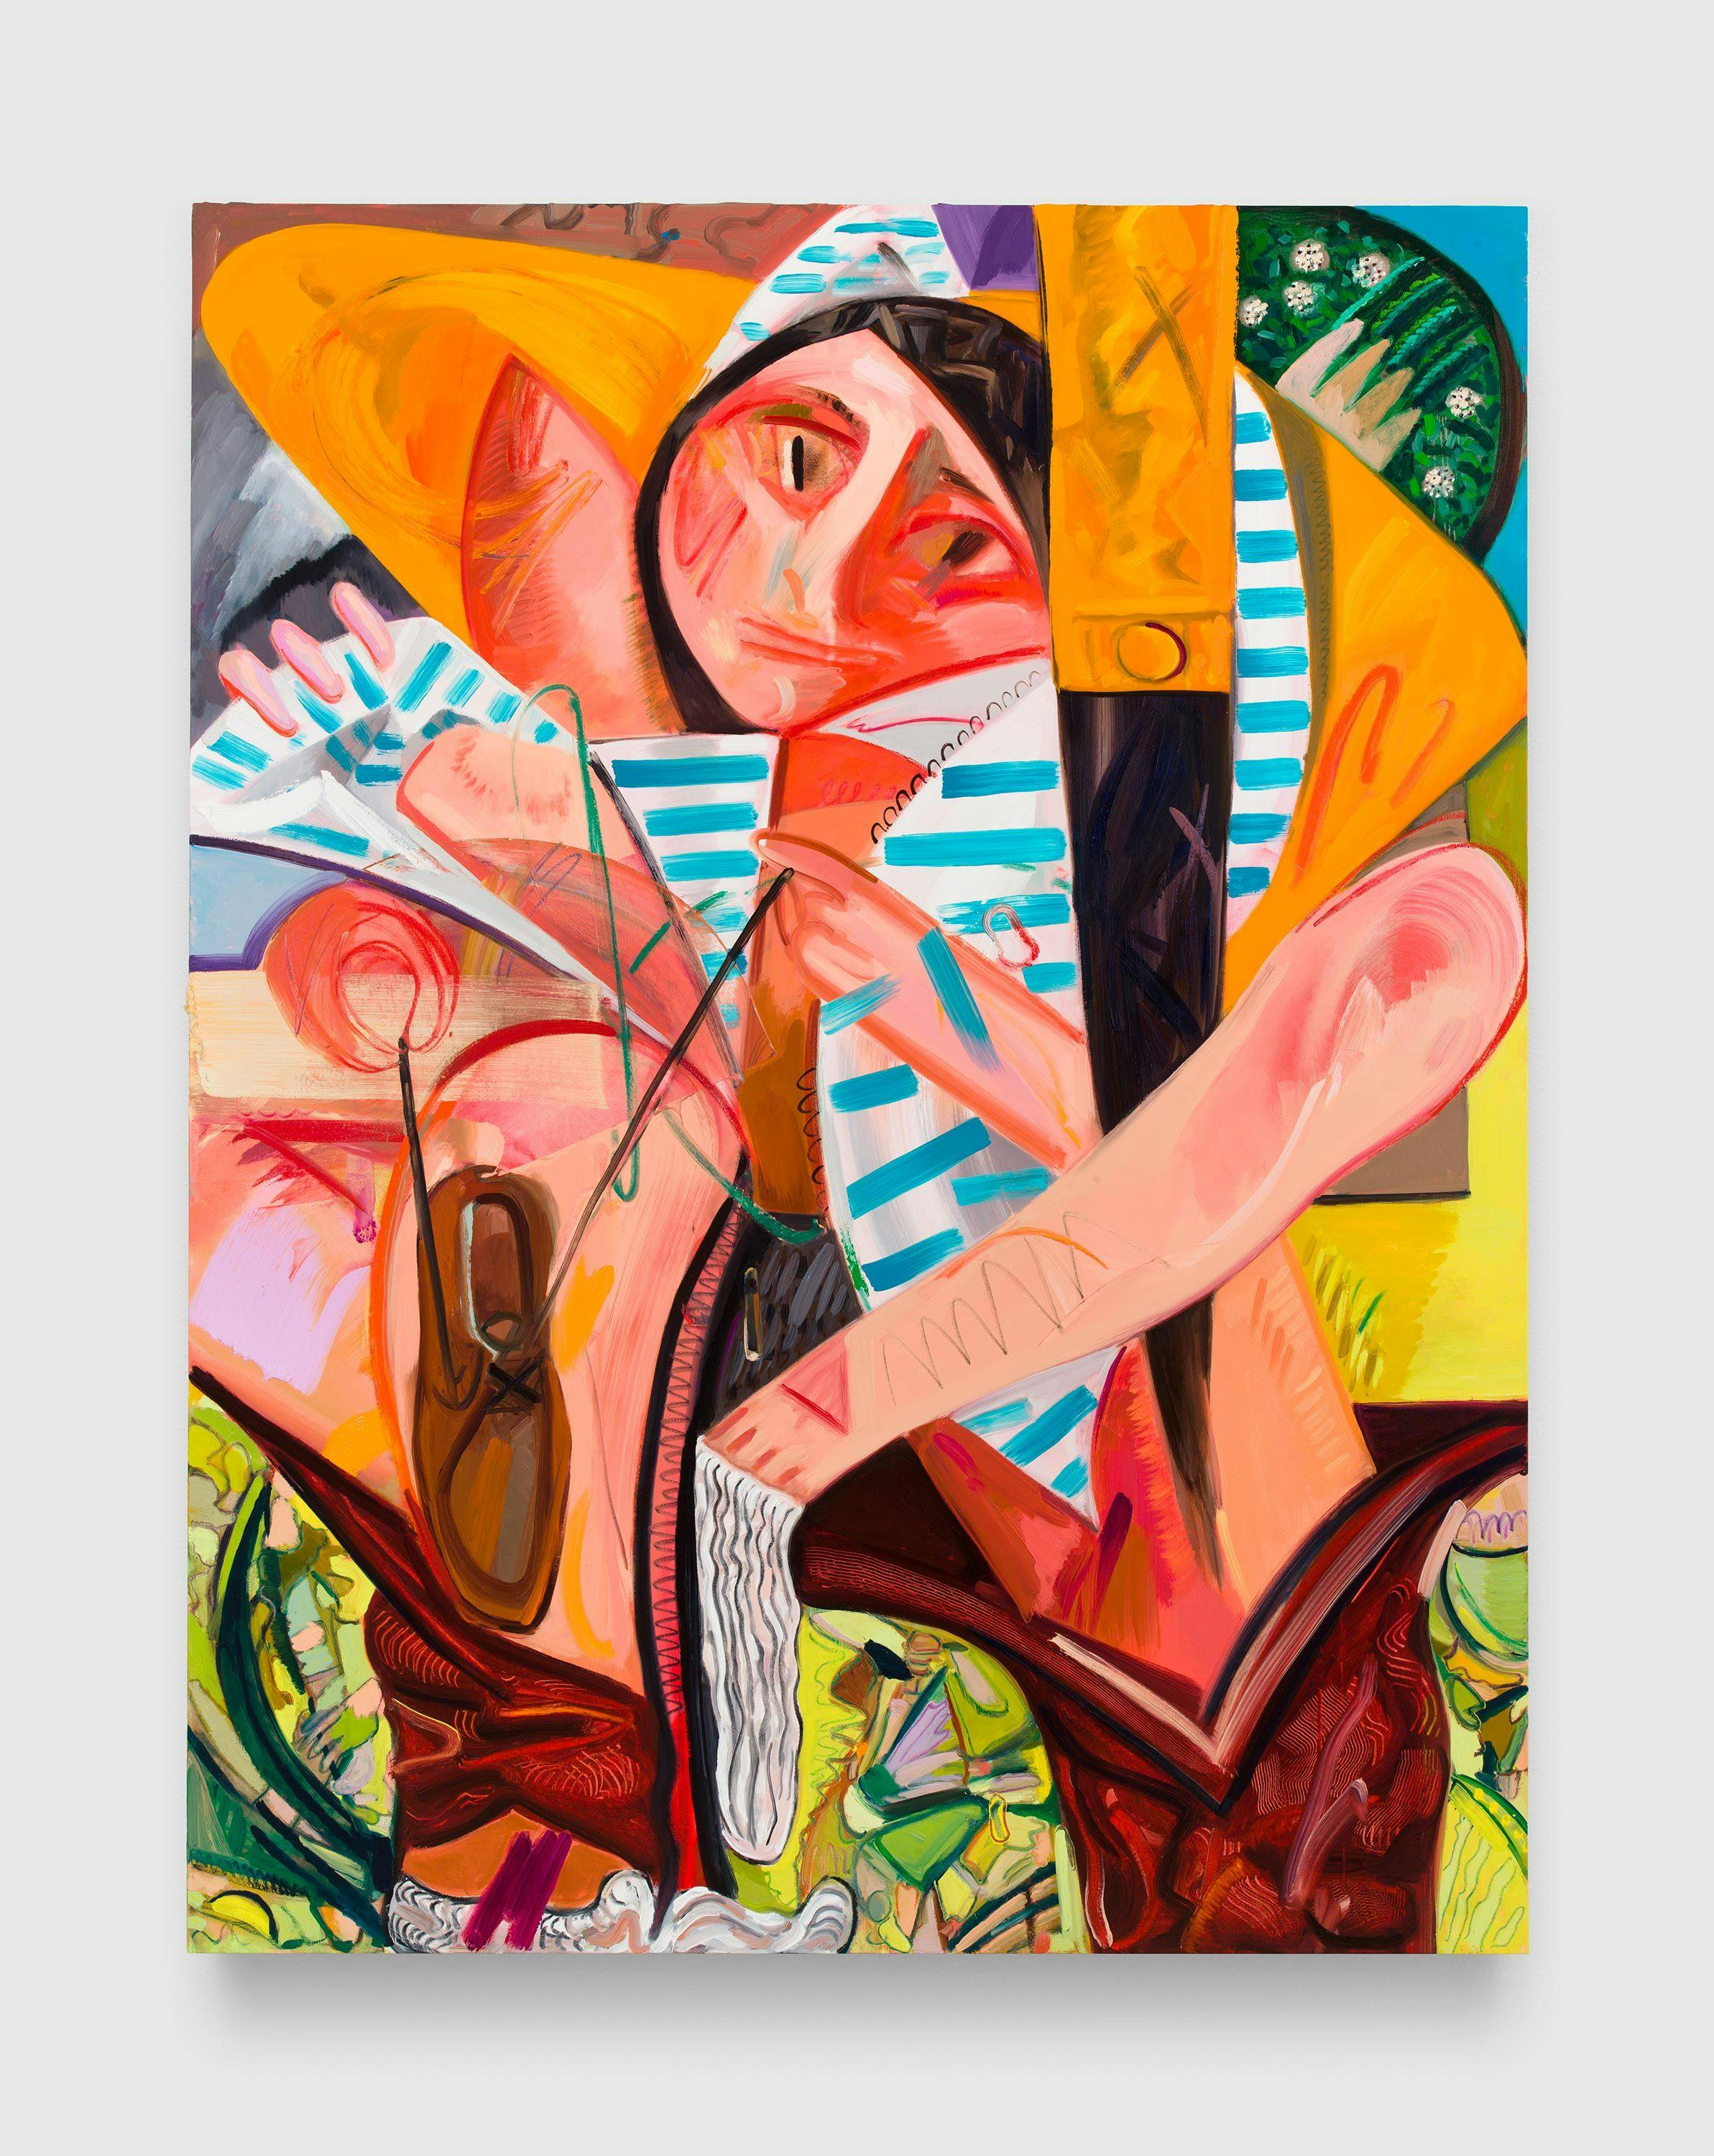 A painting by Dana Schutz, titled Getting Dressed All at Once, dated 2012.